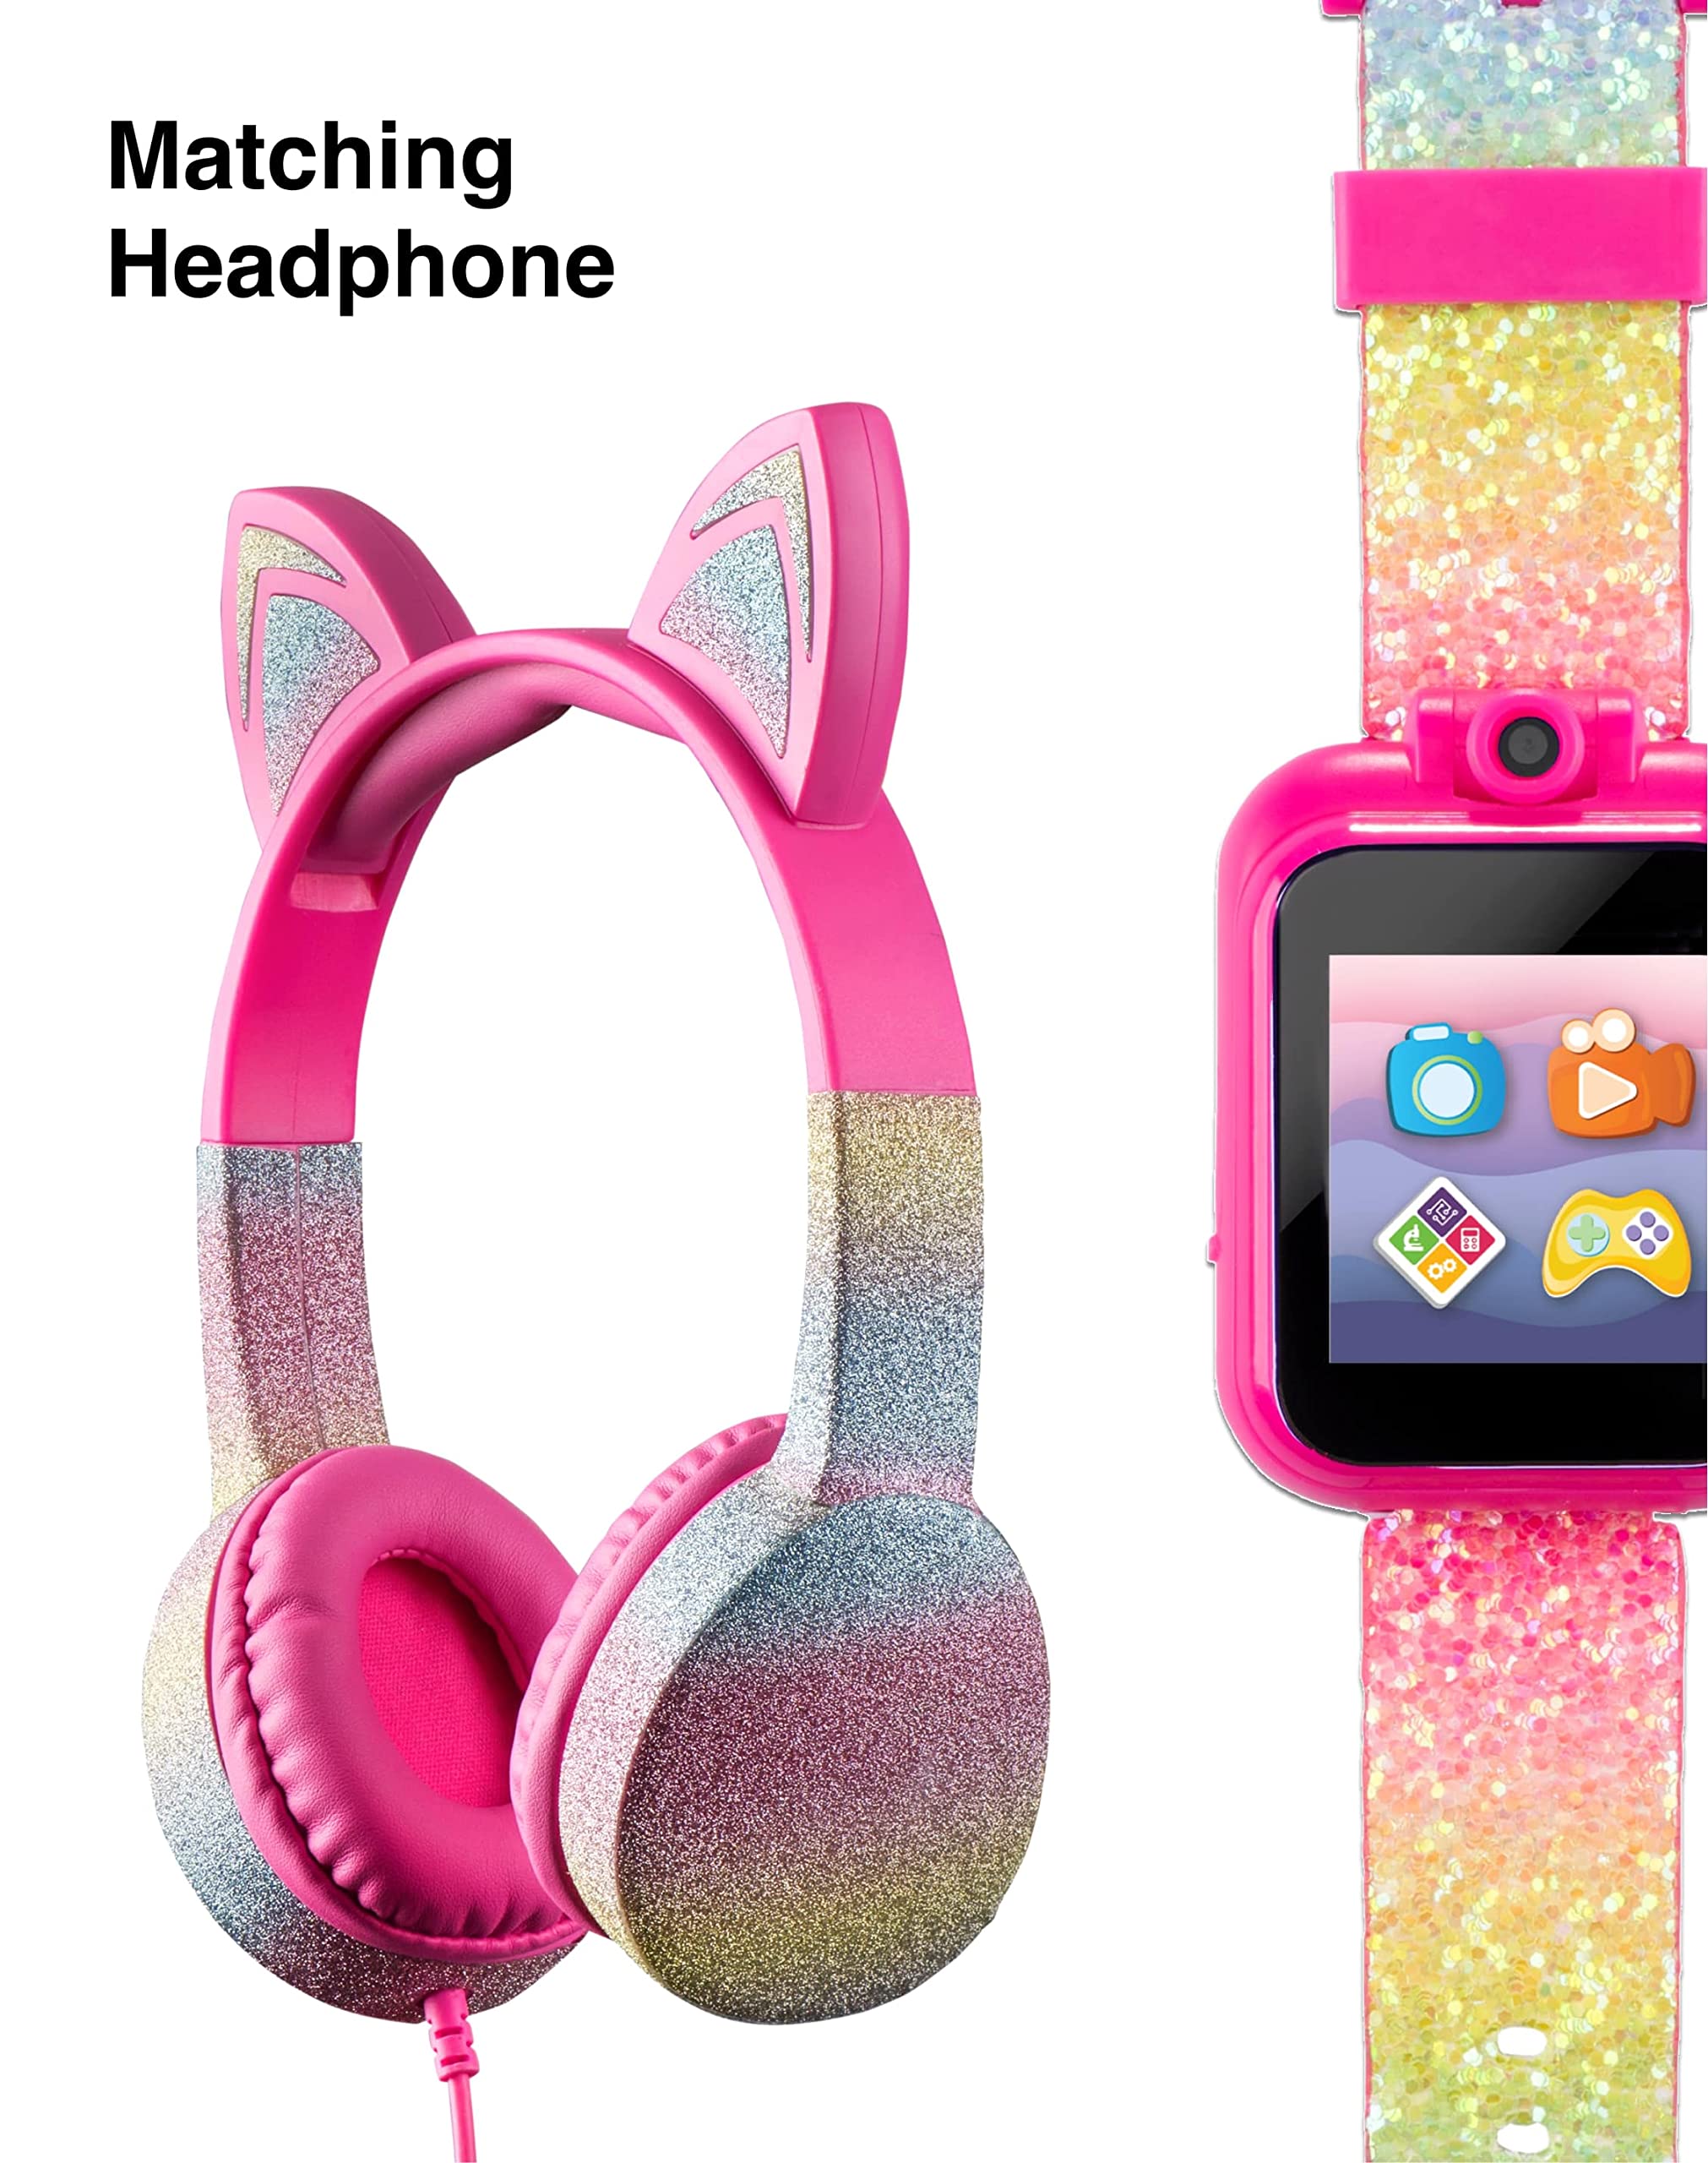 PlayZoom Kids Smartwatch 2 with Headphones Featuring a Swivel Selfie Camera, STEM Learning, 20+ Games, Audio Bedtime Stories, Store Music for Kids Toddlers Boys Girls